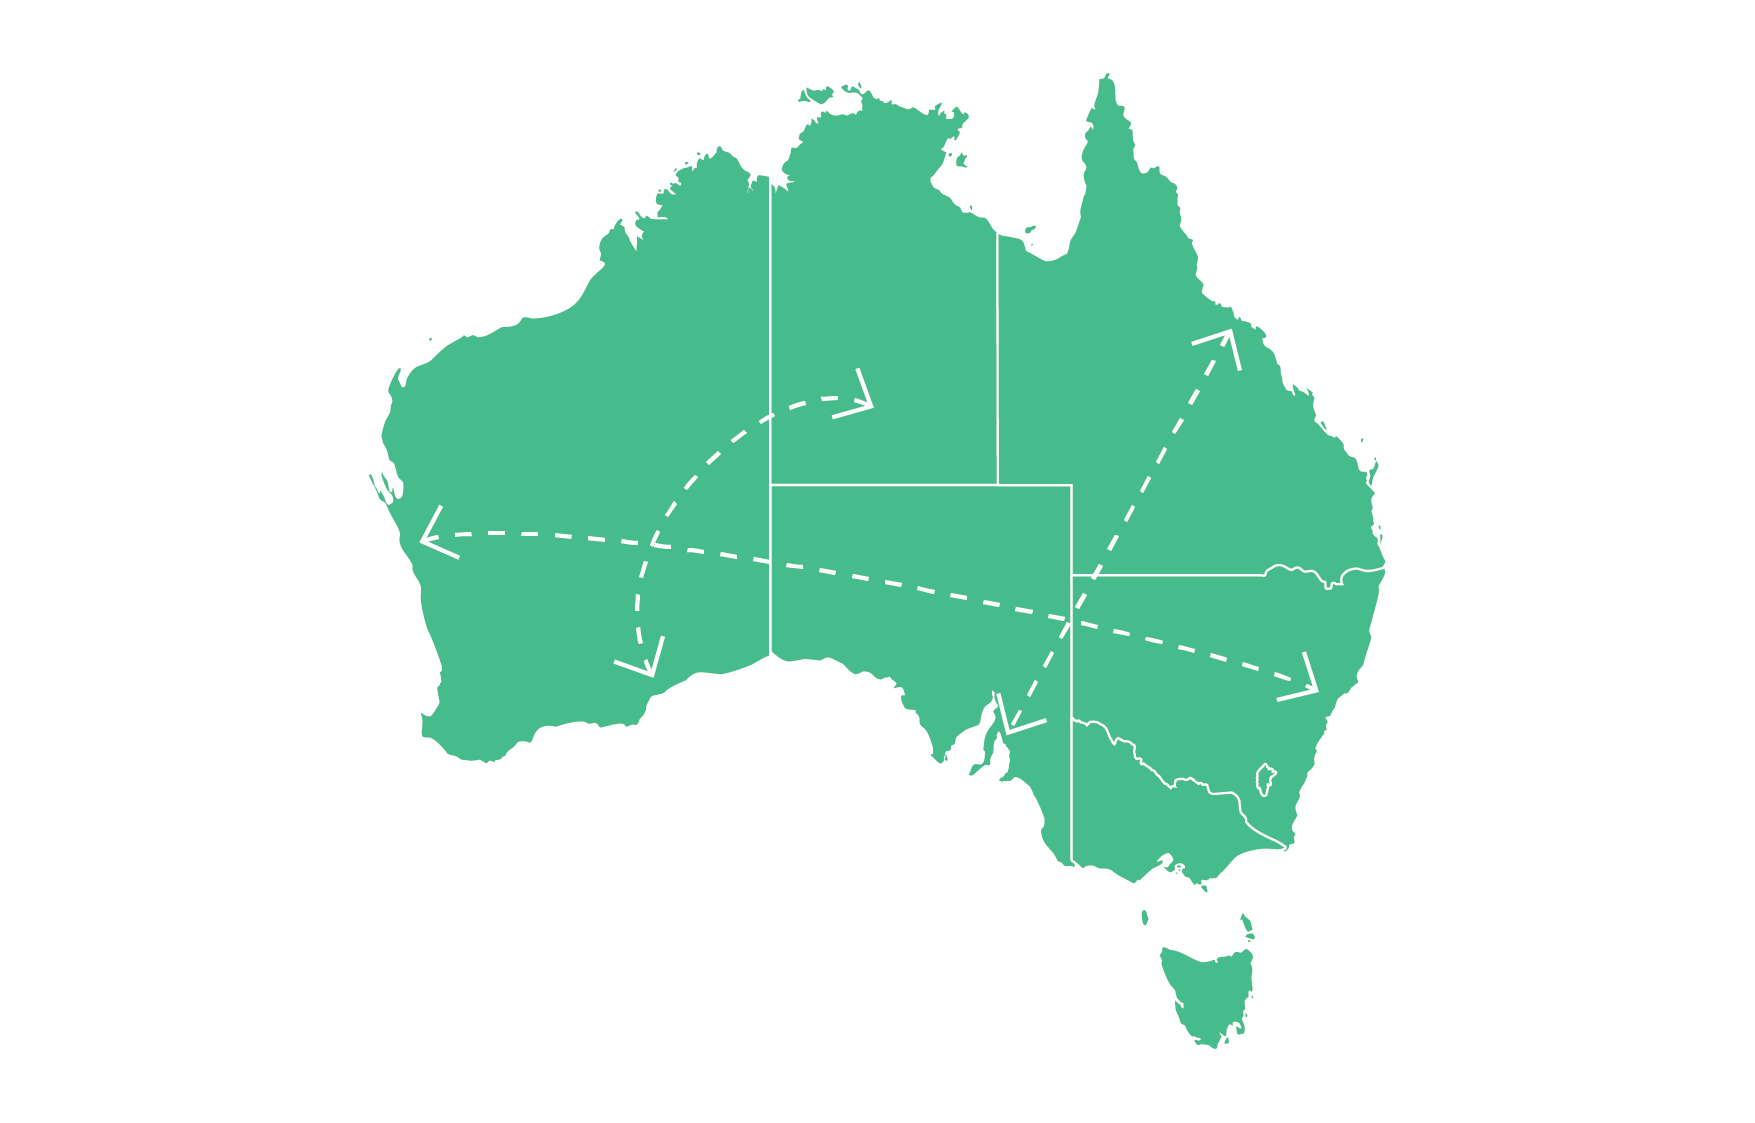 This infographic shows a map of Australia with arrows between different states and territories to symbolise the effects of interstate migration on population change